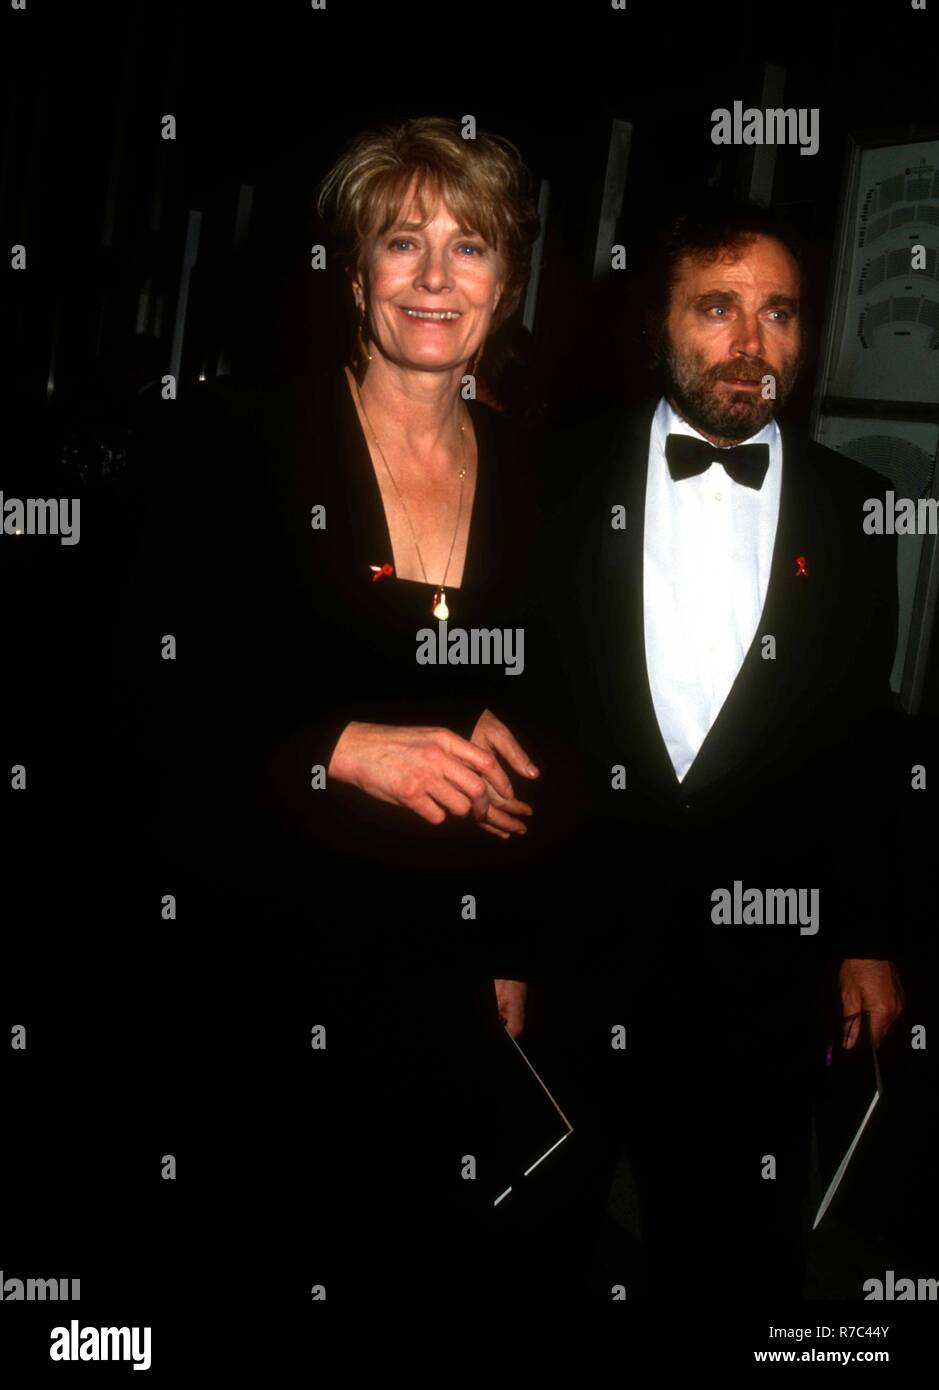 LOS ANGELES, CA - MARCH 29: Actress Vanessa Redgrave and husband actor Franco Nero attend the 65th Annual Academy Awards on March 29, 1993 at the Dorothy Chandler Pavilion in Los Angeles, California. Photo by Barry King/Alamy Stock Photo Stock Photo